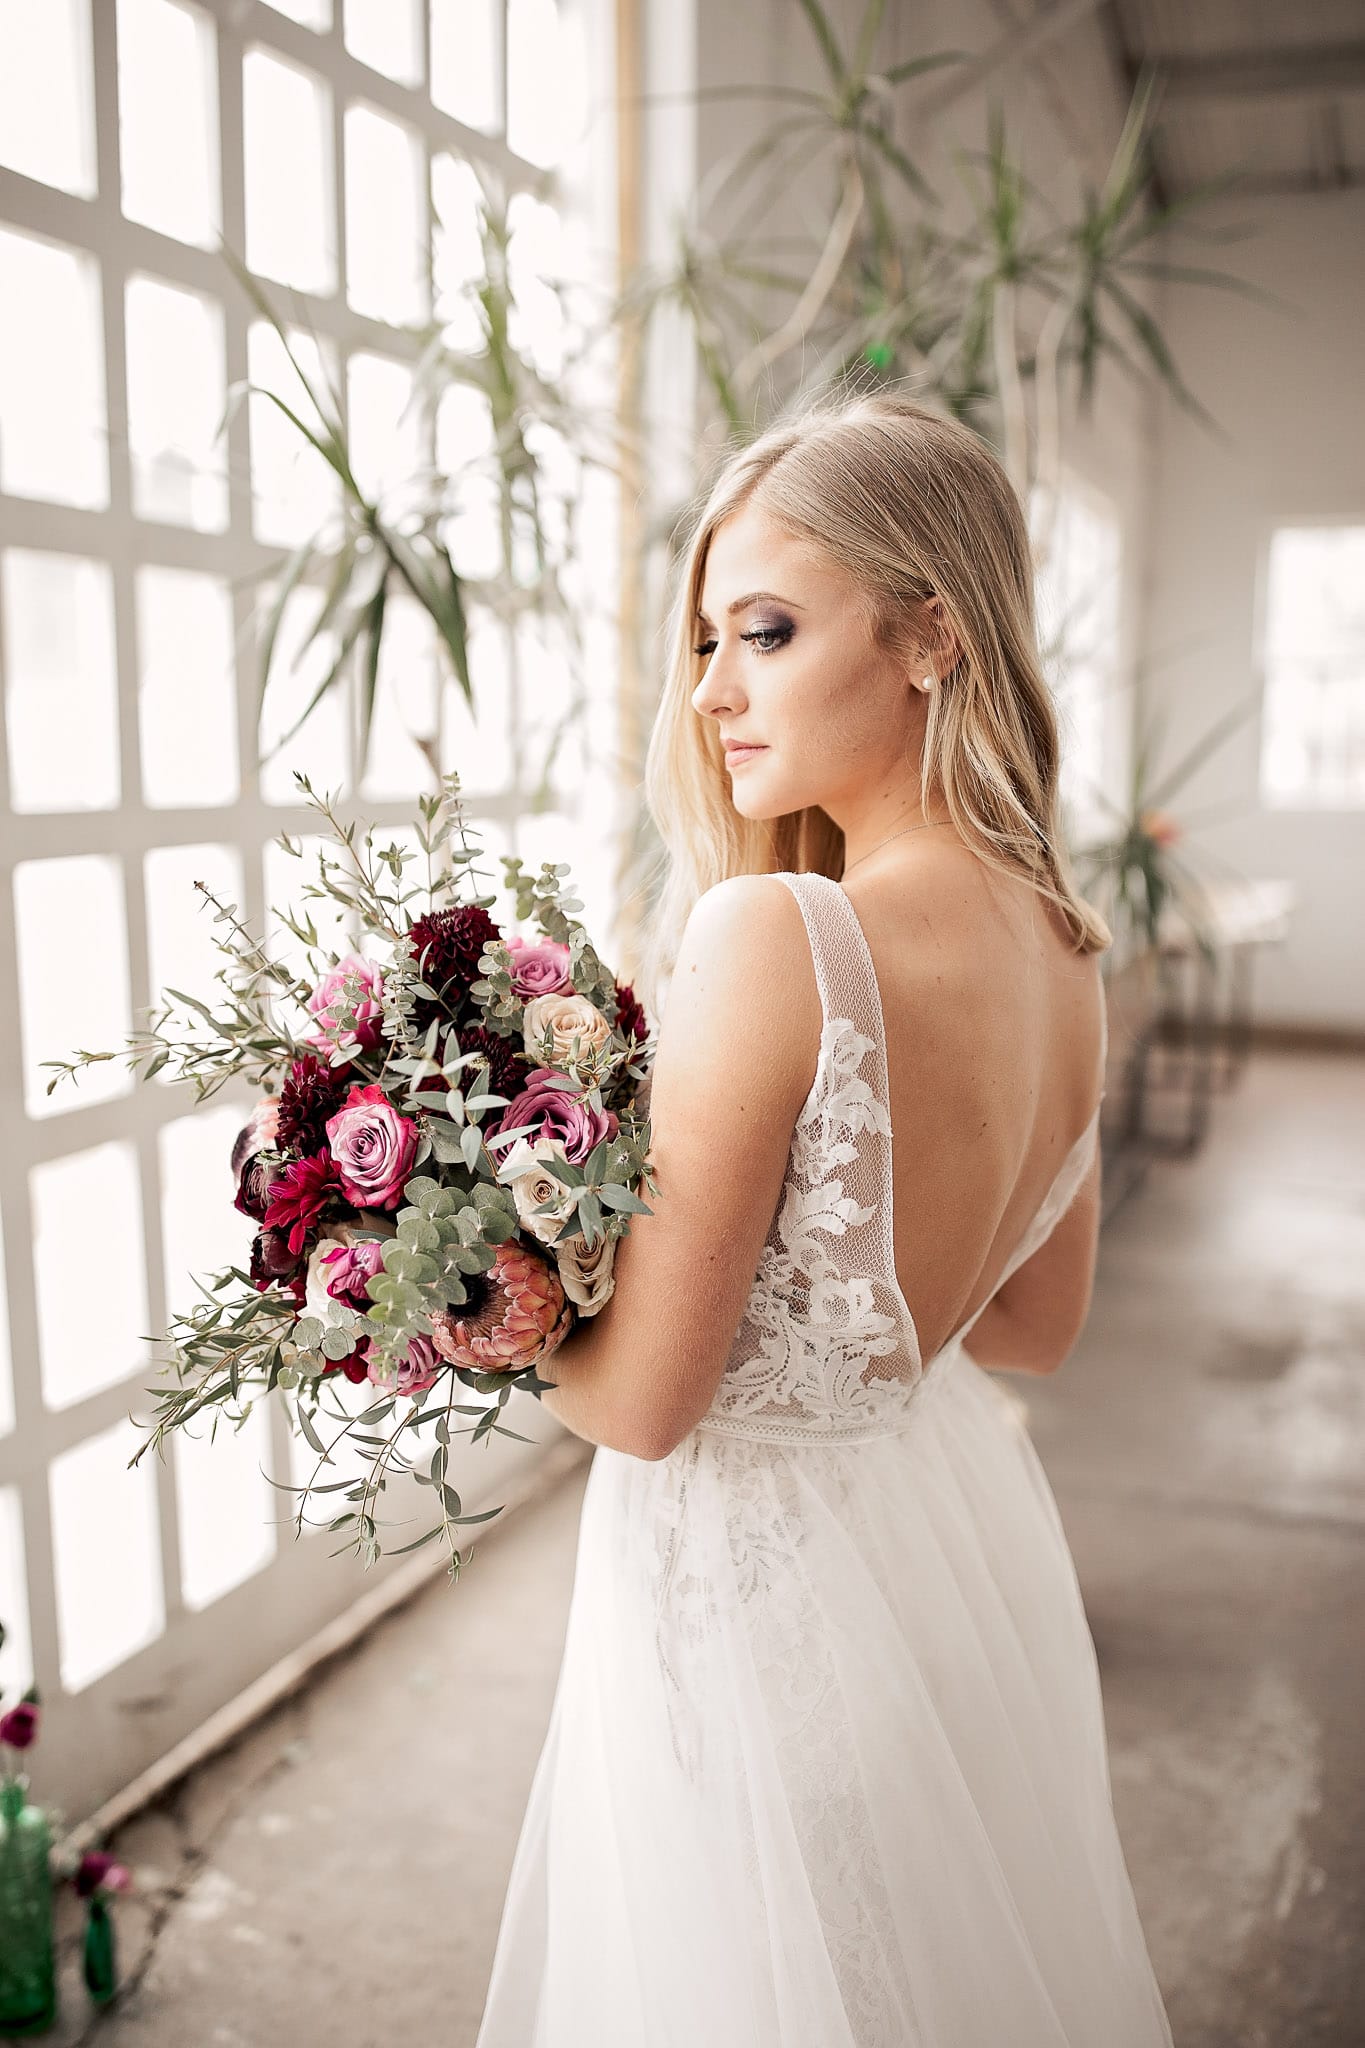 Chic and Romantic Styled Shoot Featuring Four Maggie Sottero Wedding Gowns.